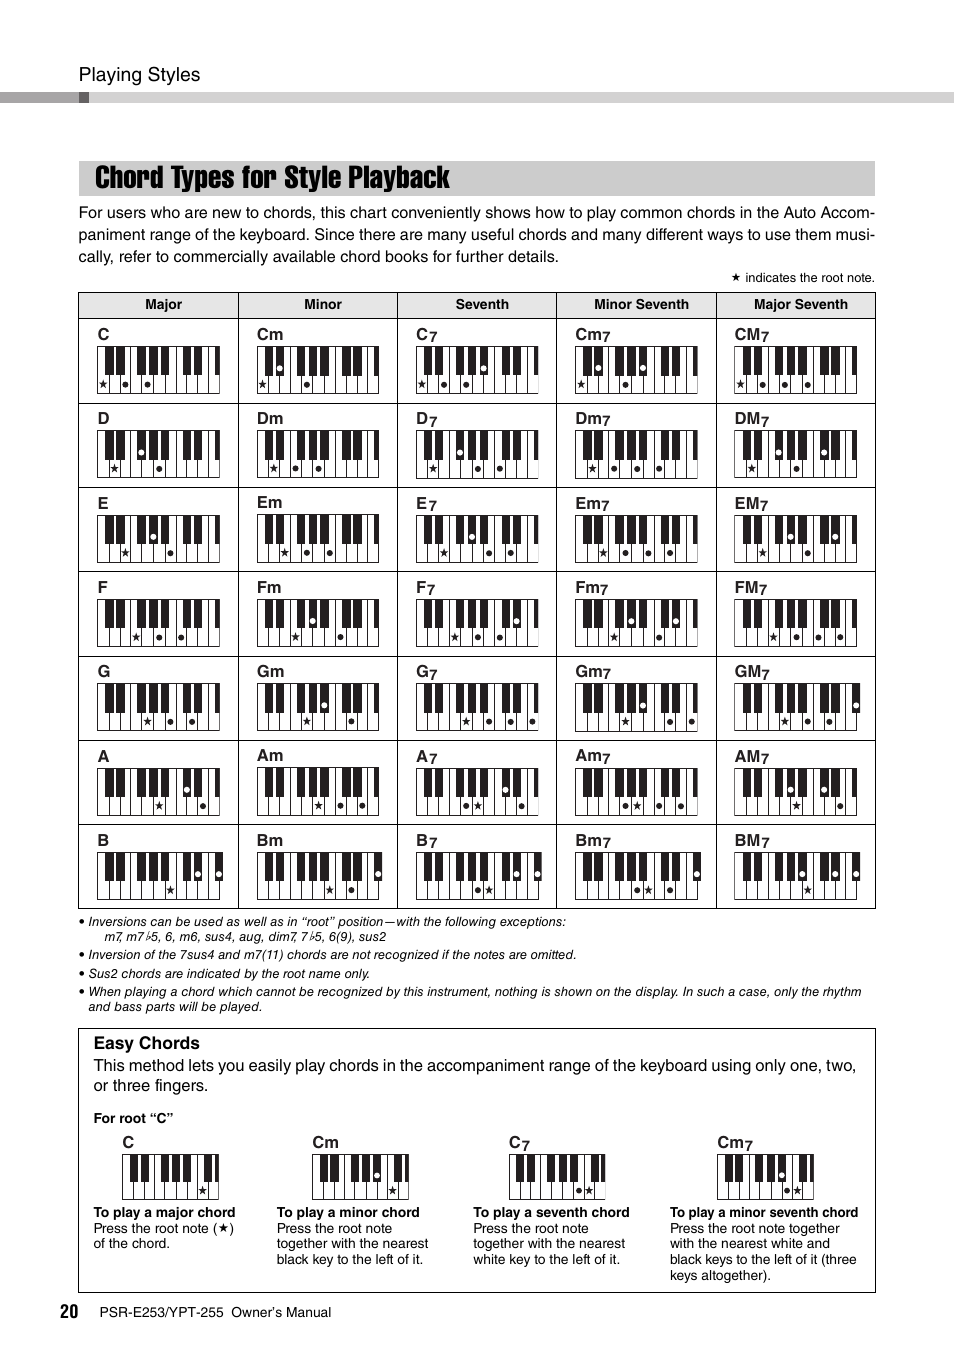 Chord types for style playback, Playing styles | Yamaha PSR-E253 User Manual | Page 20 / 48